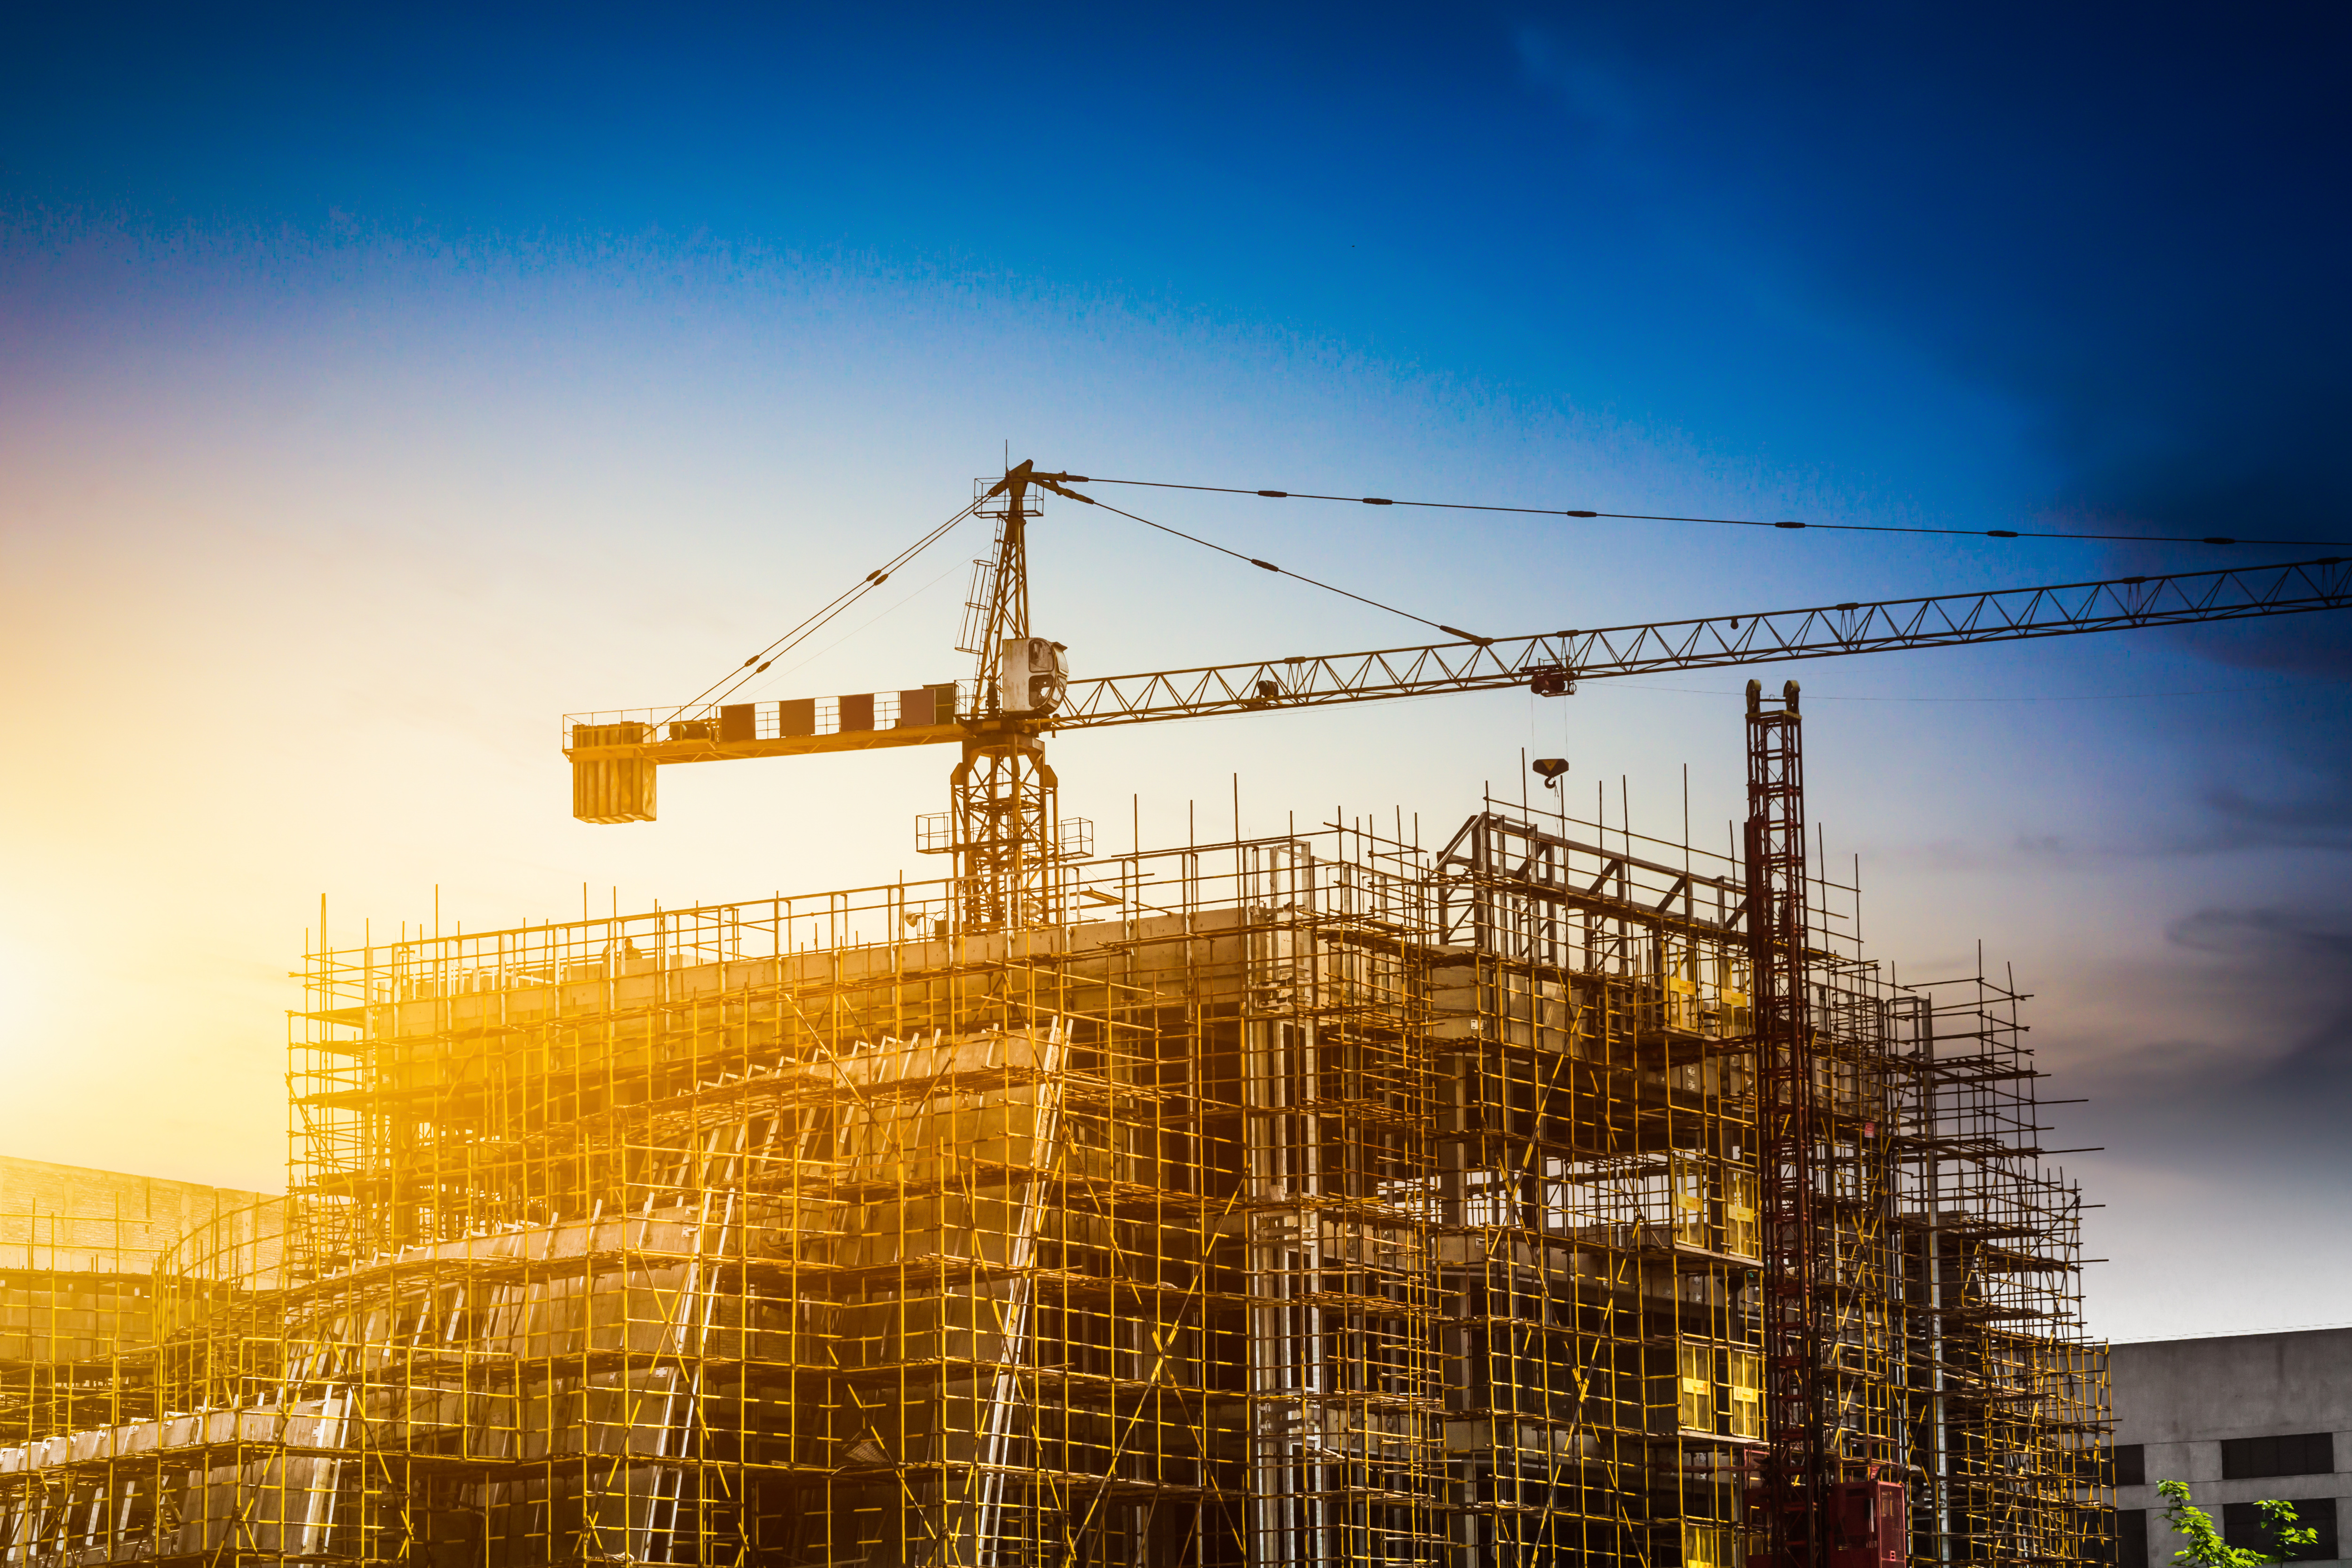 Despite economic turmoil Australian construction sector is expected to record moderate growth over the next couple of years